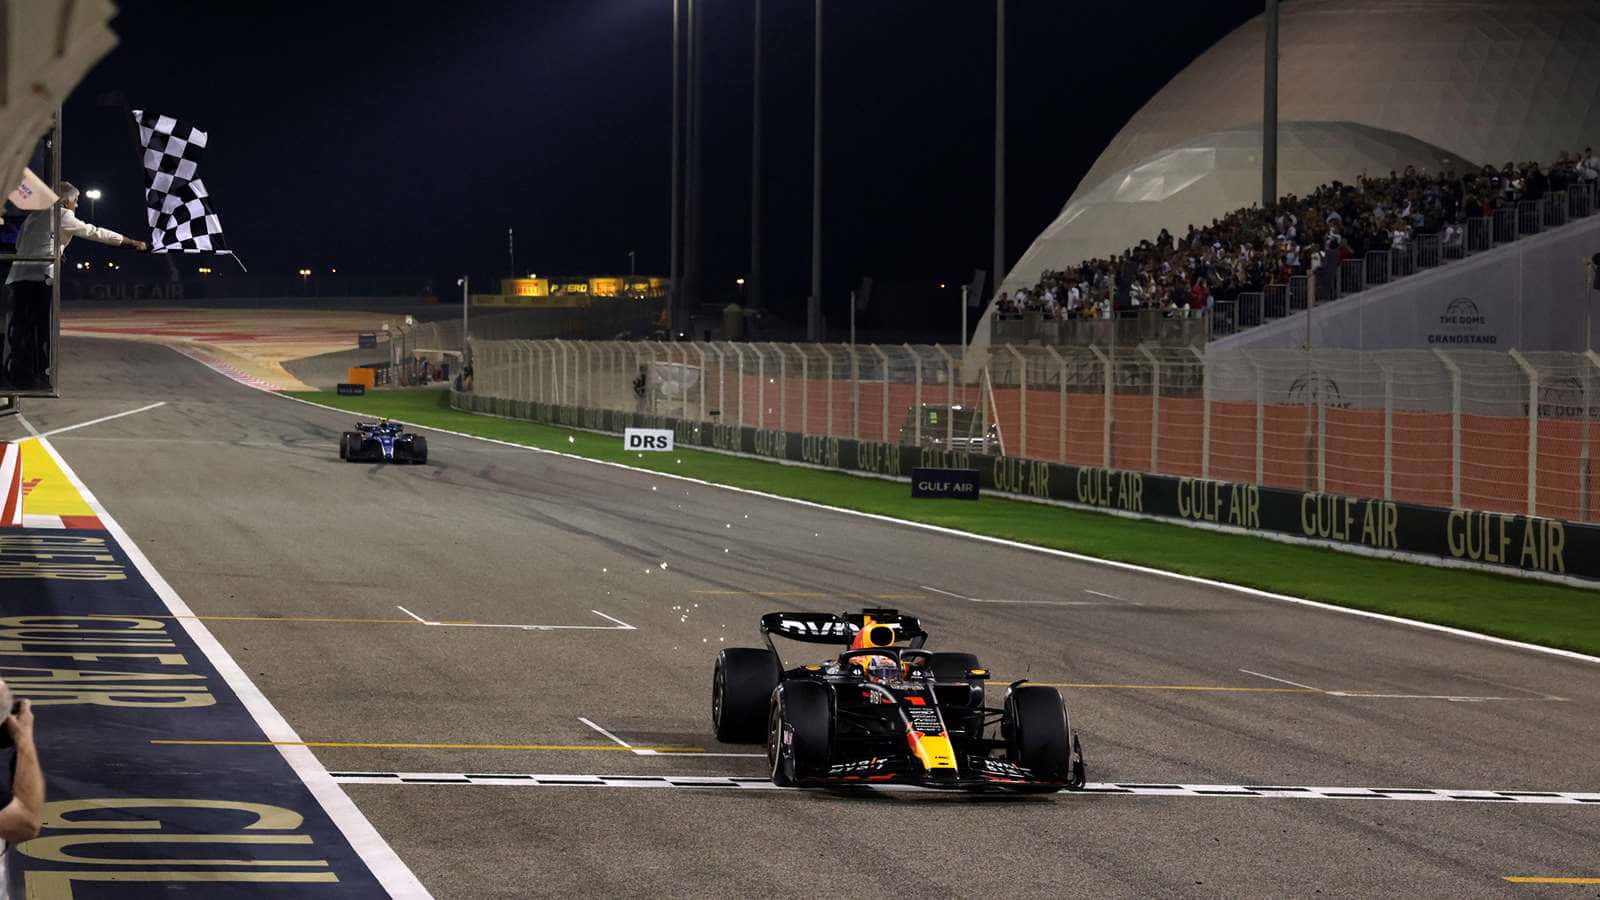 The F1 cars race at the Bahrain Grand Prix Wallpaper